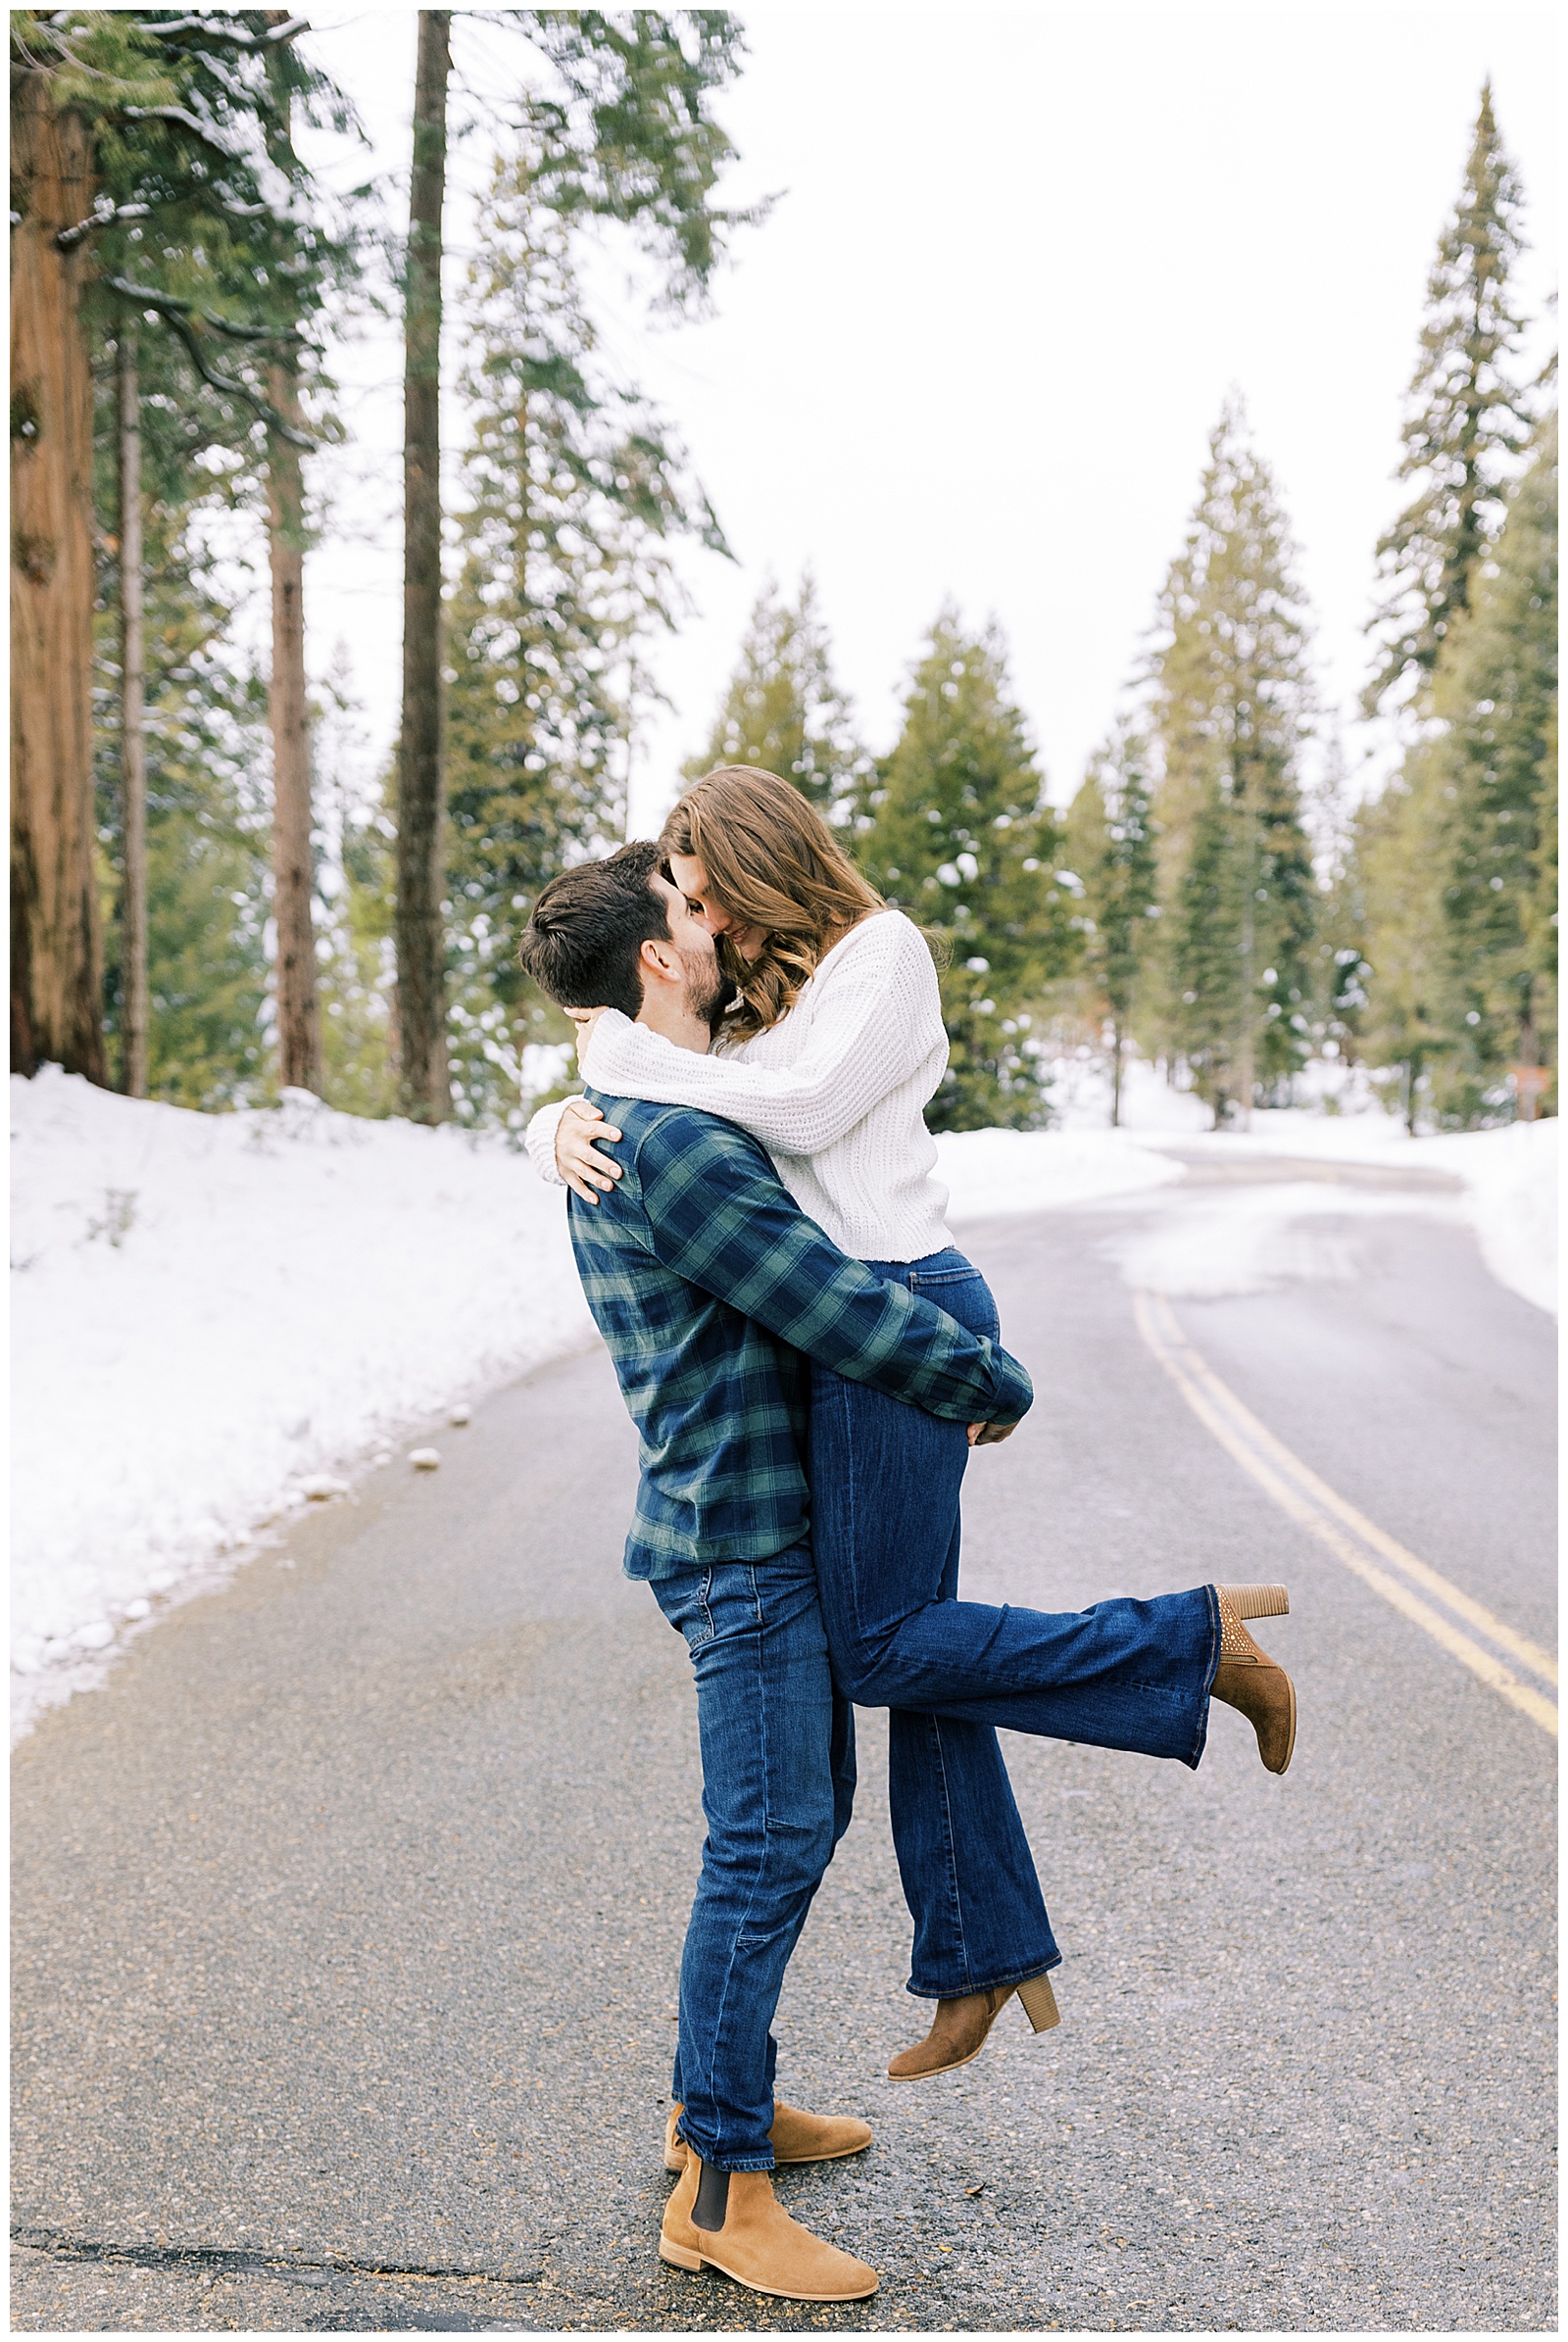 man picking up fiance kissing her on mountain road evergreen trees snow winter engagement photos